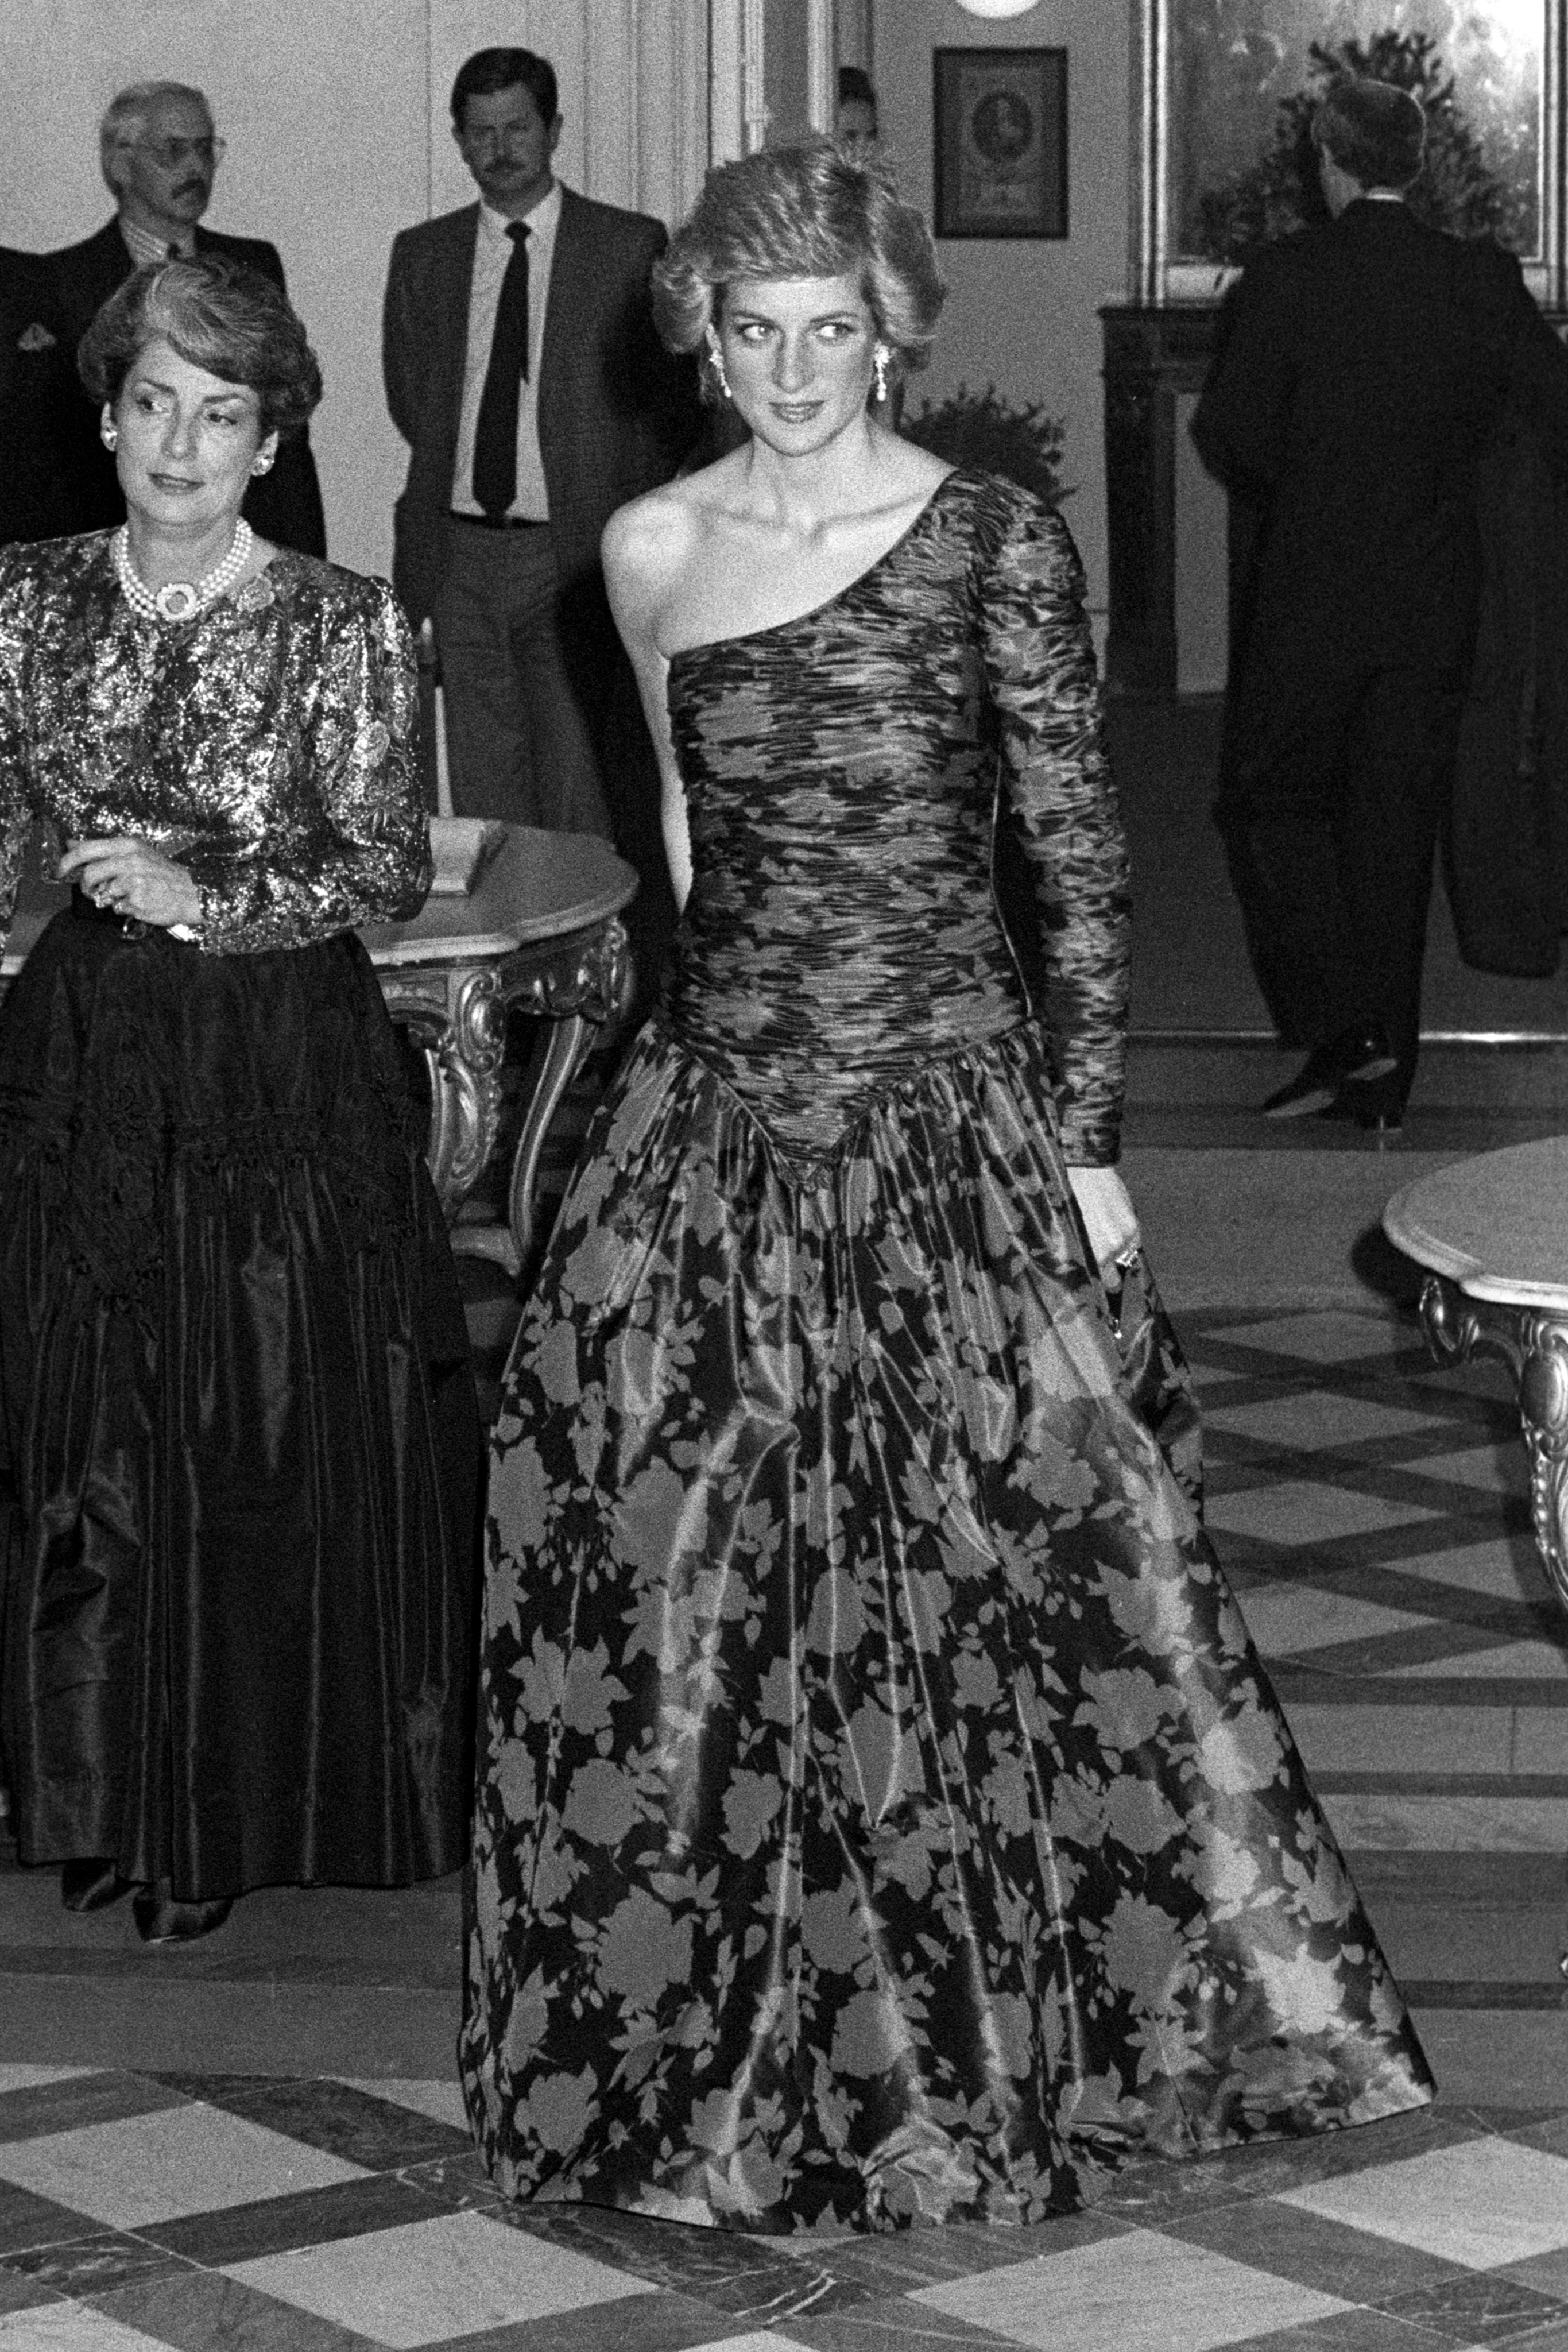 The Princess of Wales at a dinner and reception at the British Embassy in Paris in 1988